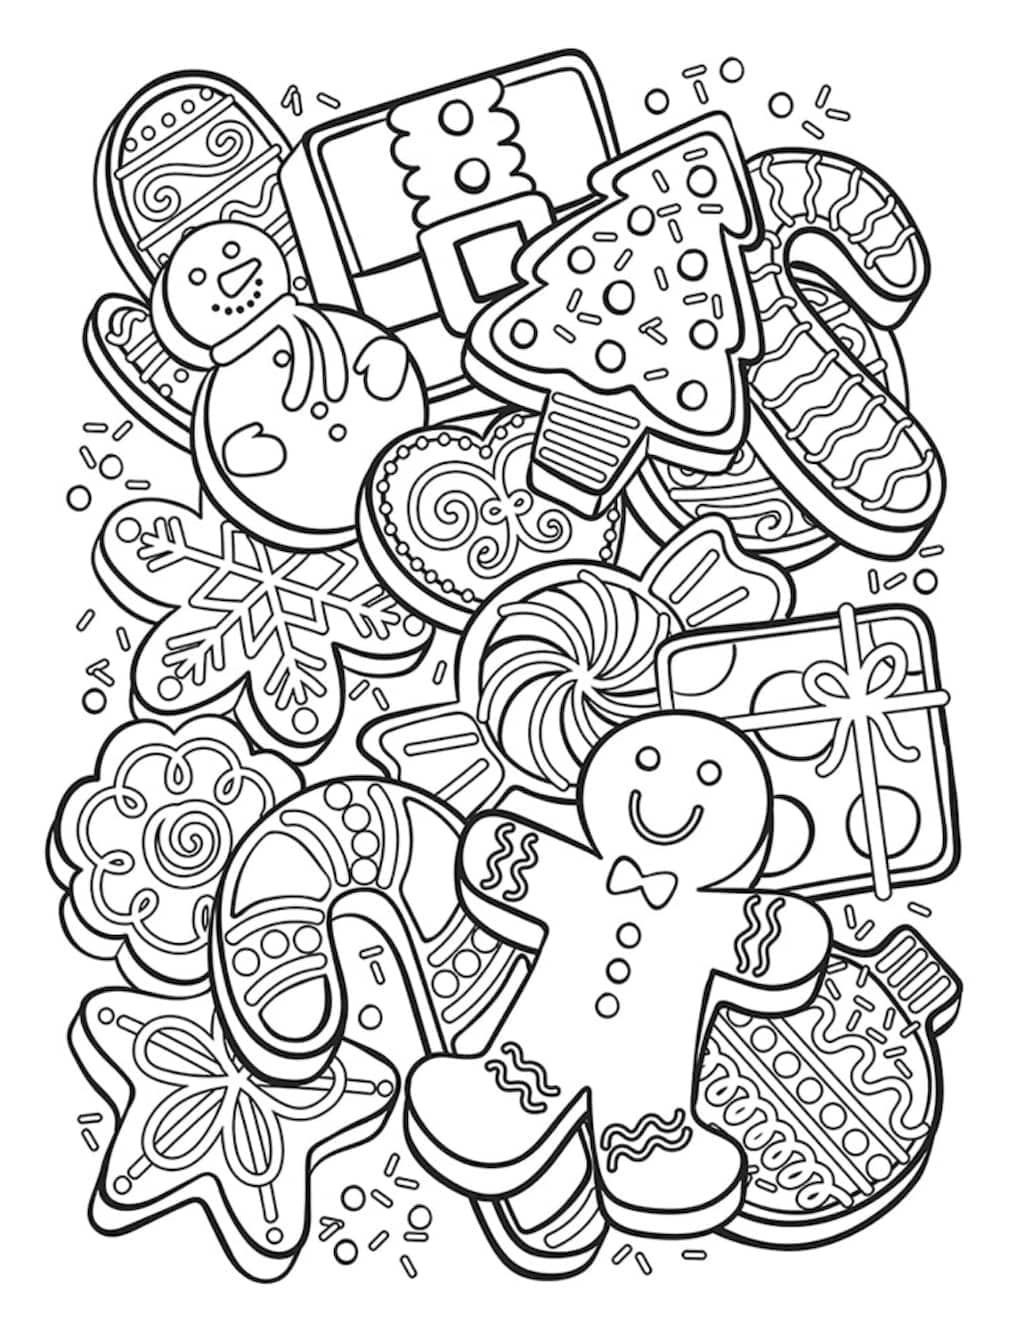 The Most Popular Christmas Coloring Page